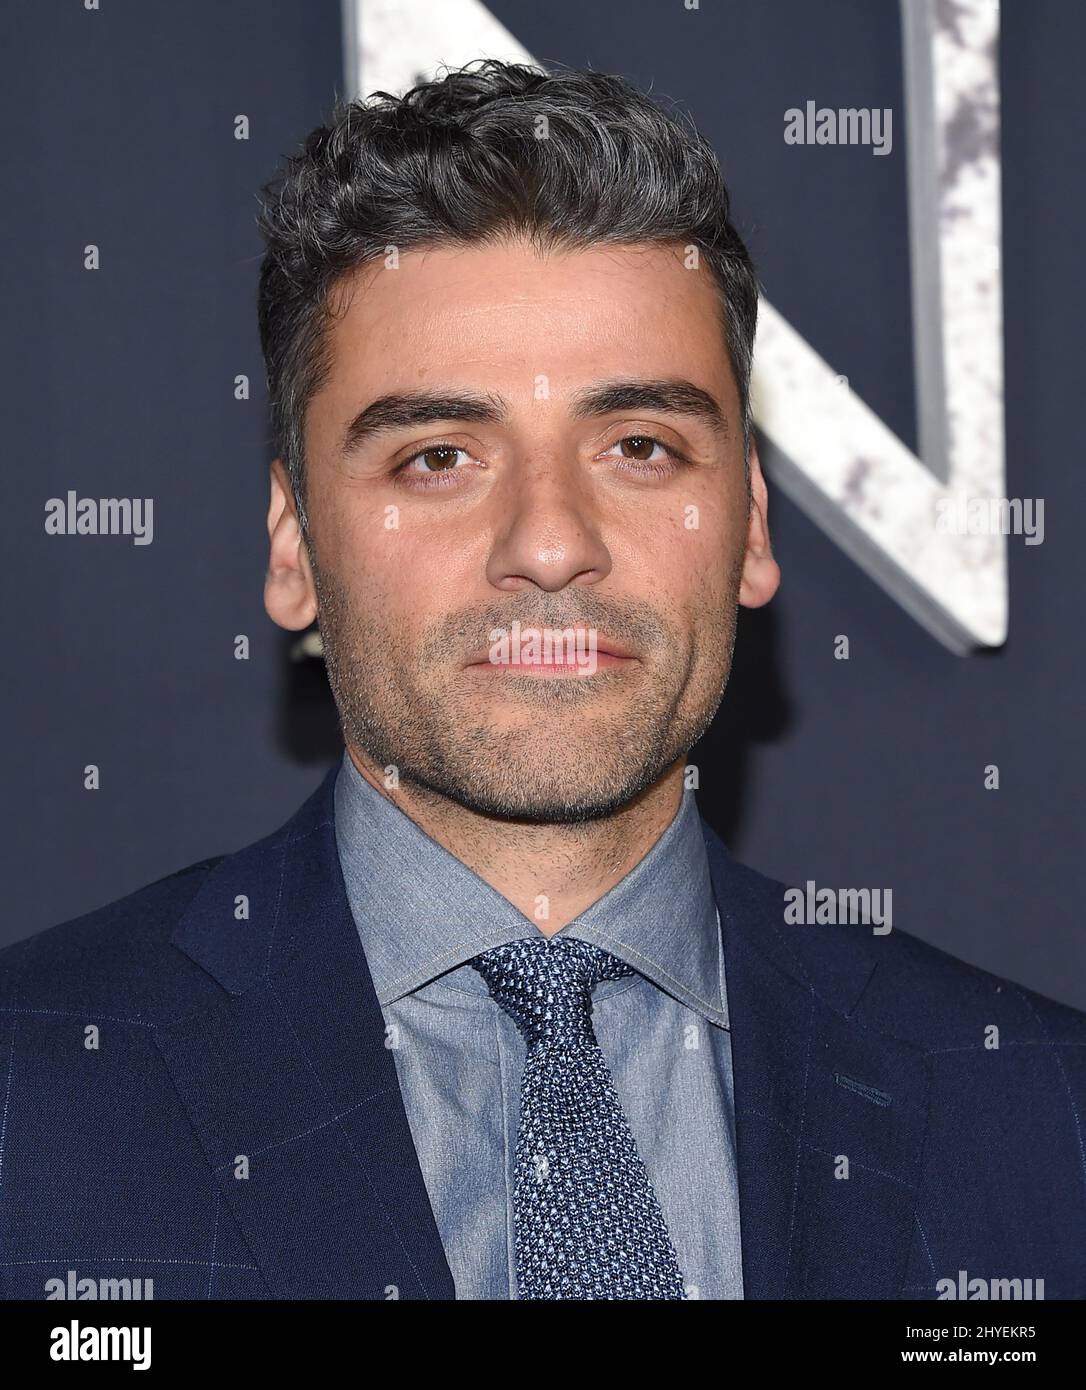 Oscar Isaac arriving for the Los Angeles premiere of 'Annihilation' held at the Regency Village Theatre on February 13, 2018 in Westwood, Los Angeles Stock Photo